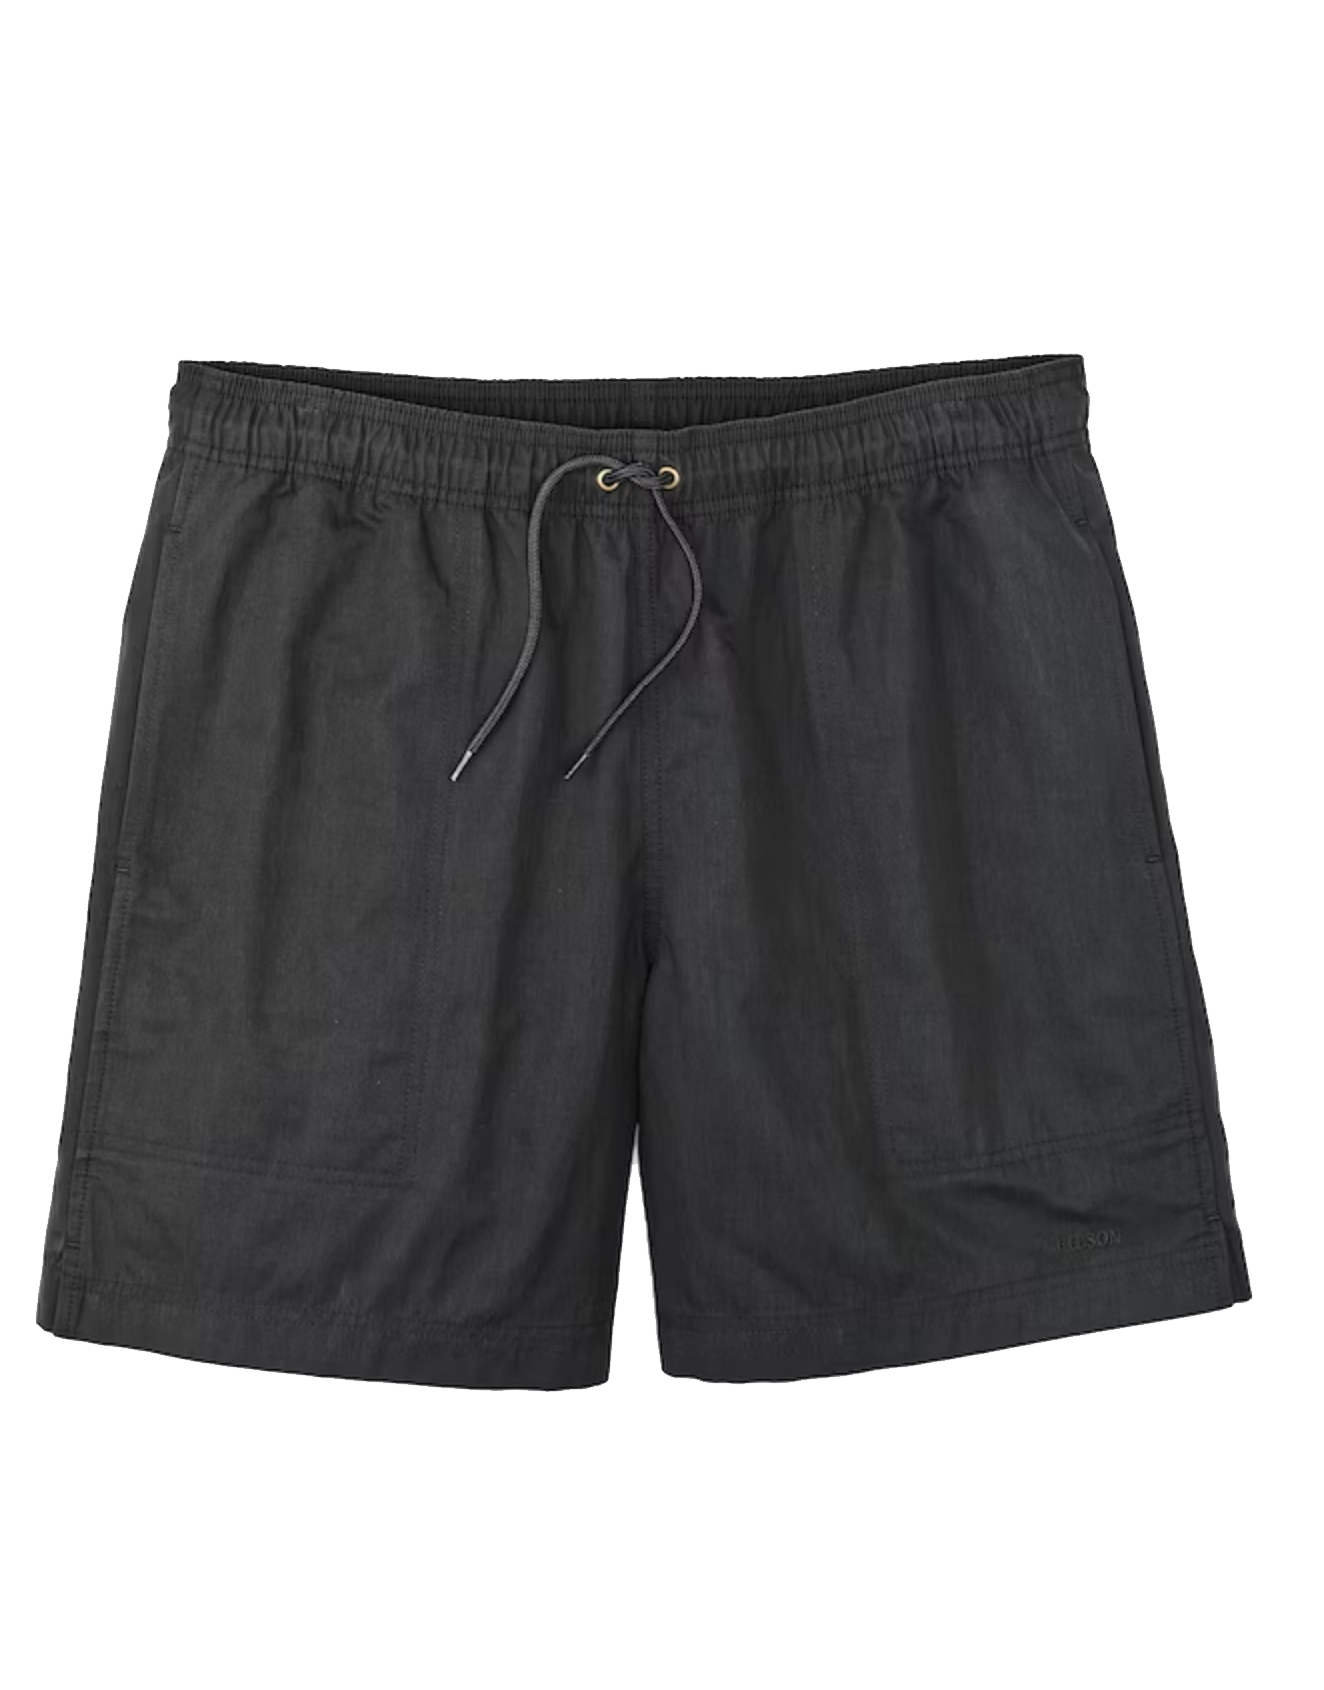 Green River Water Shorts Faded Black